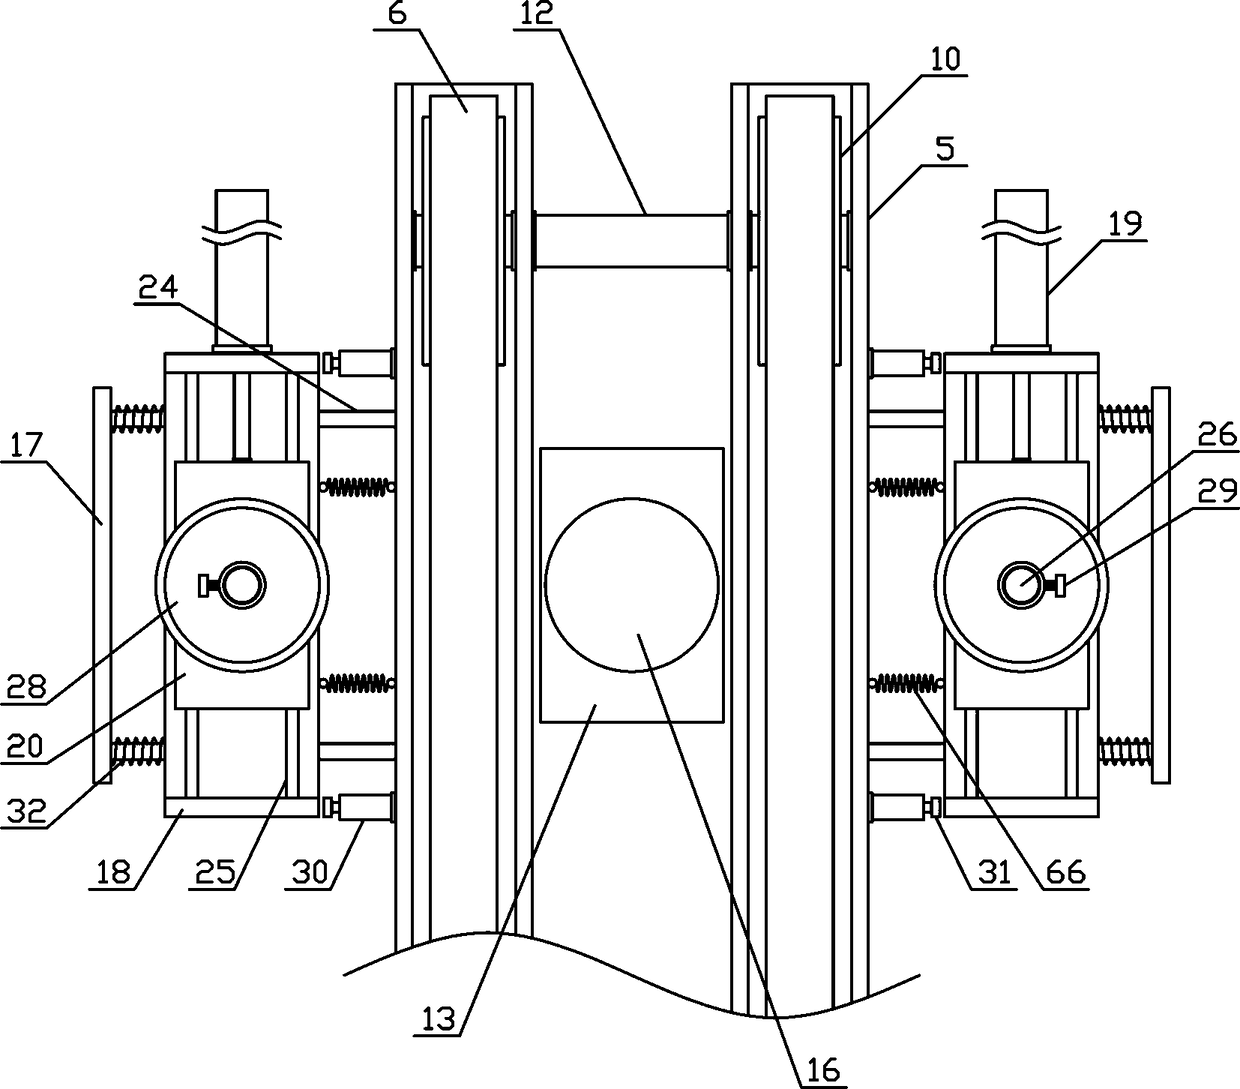 Sheet conveying and edge grinding mechanism